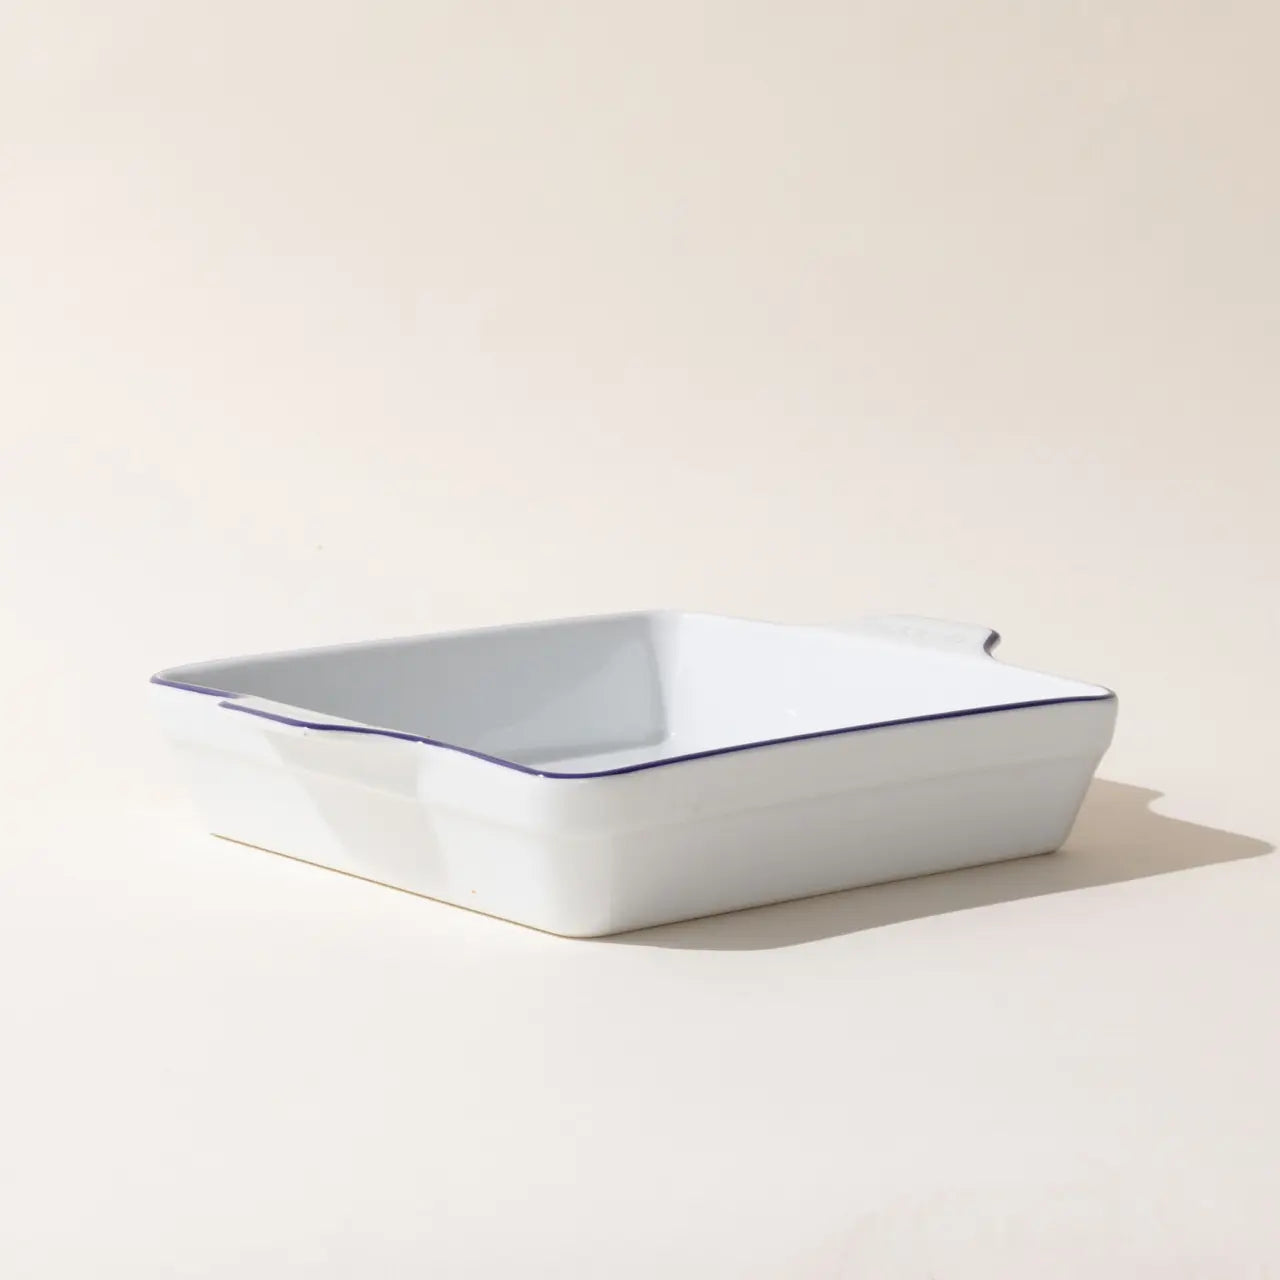 Made In Square Baking Dish 8x8", France